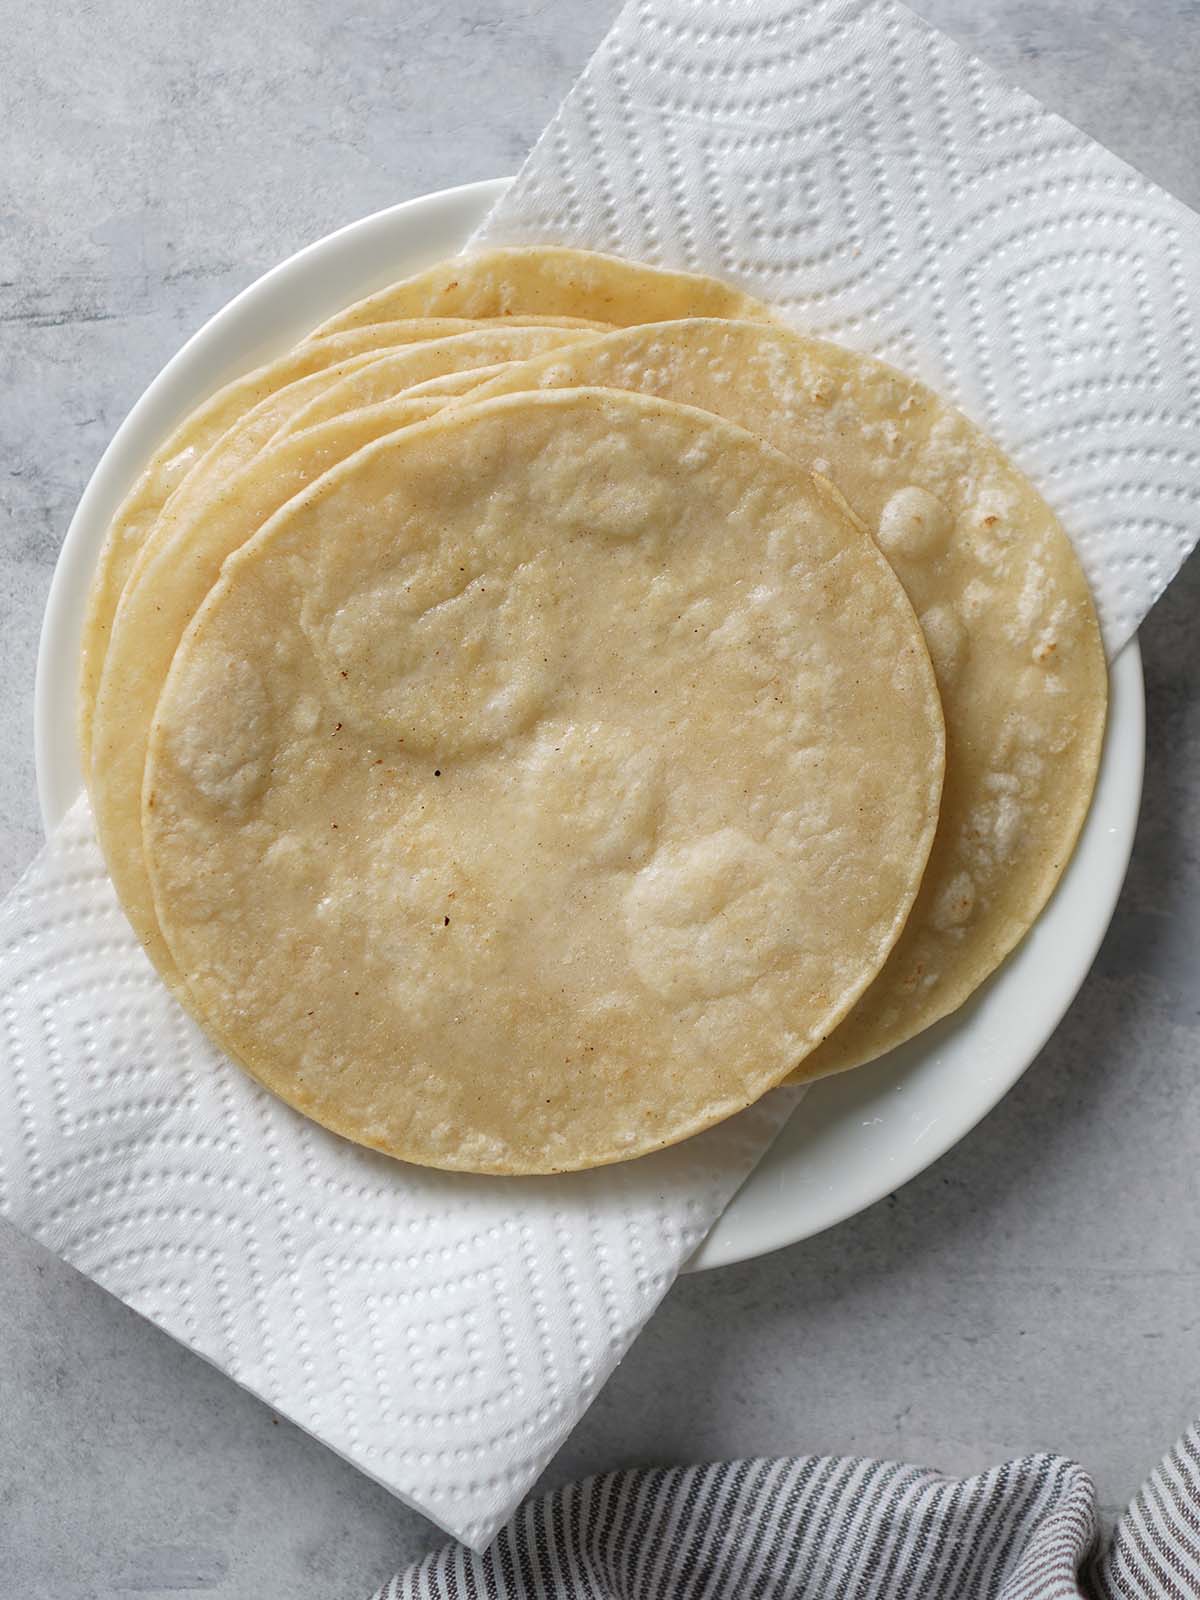 A stacked of fried corn tortillas placed on a paper towel on a plate.